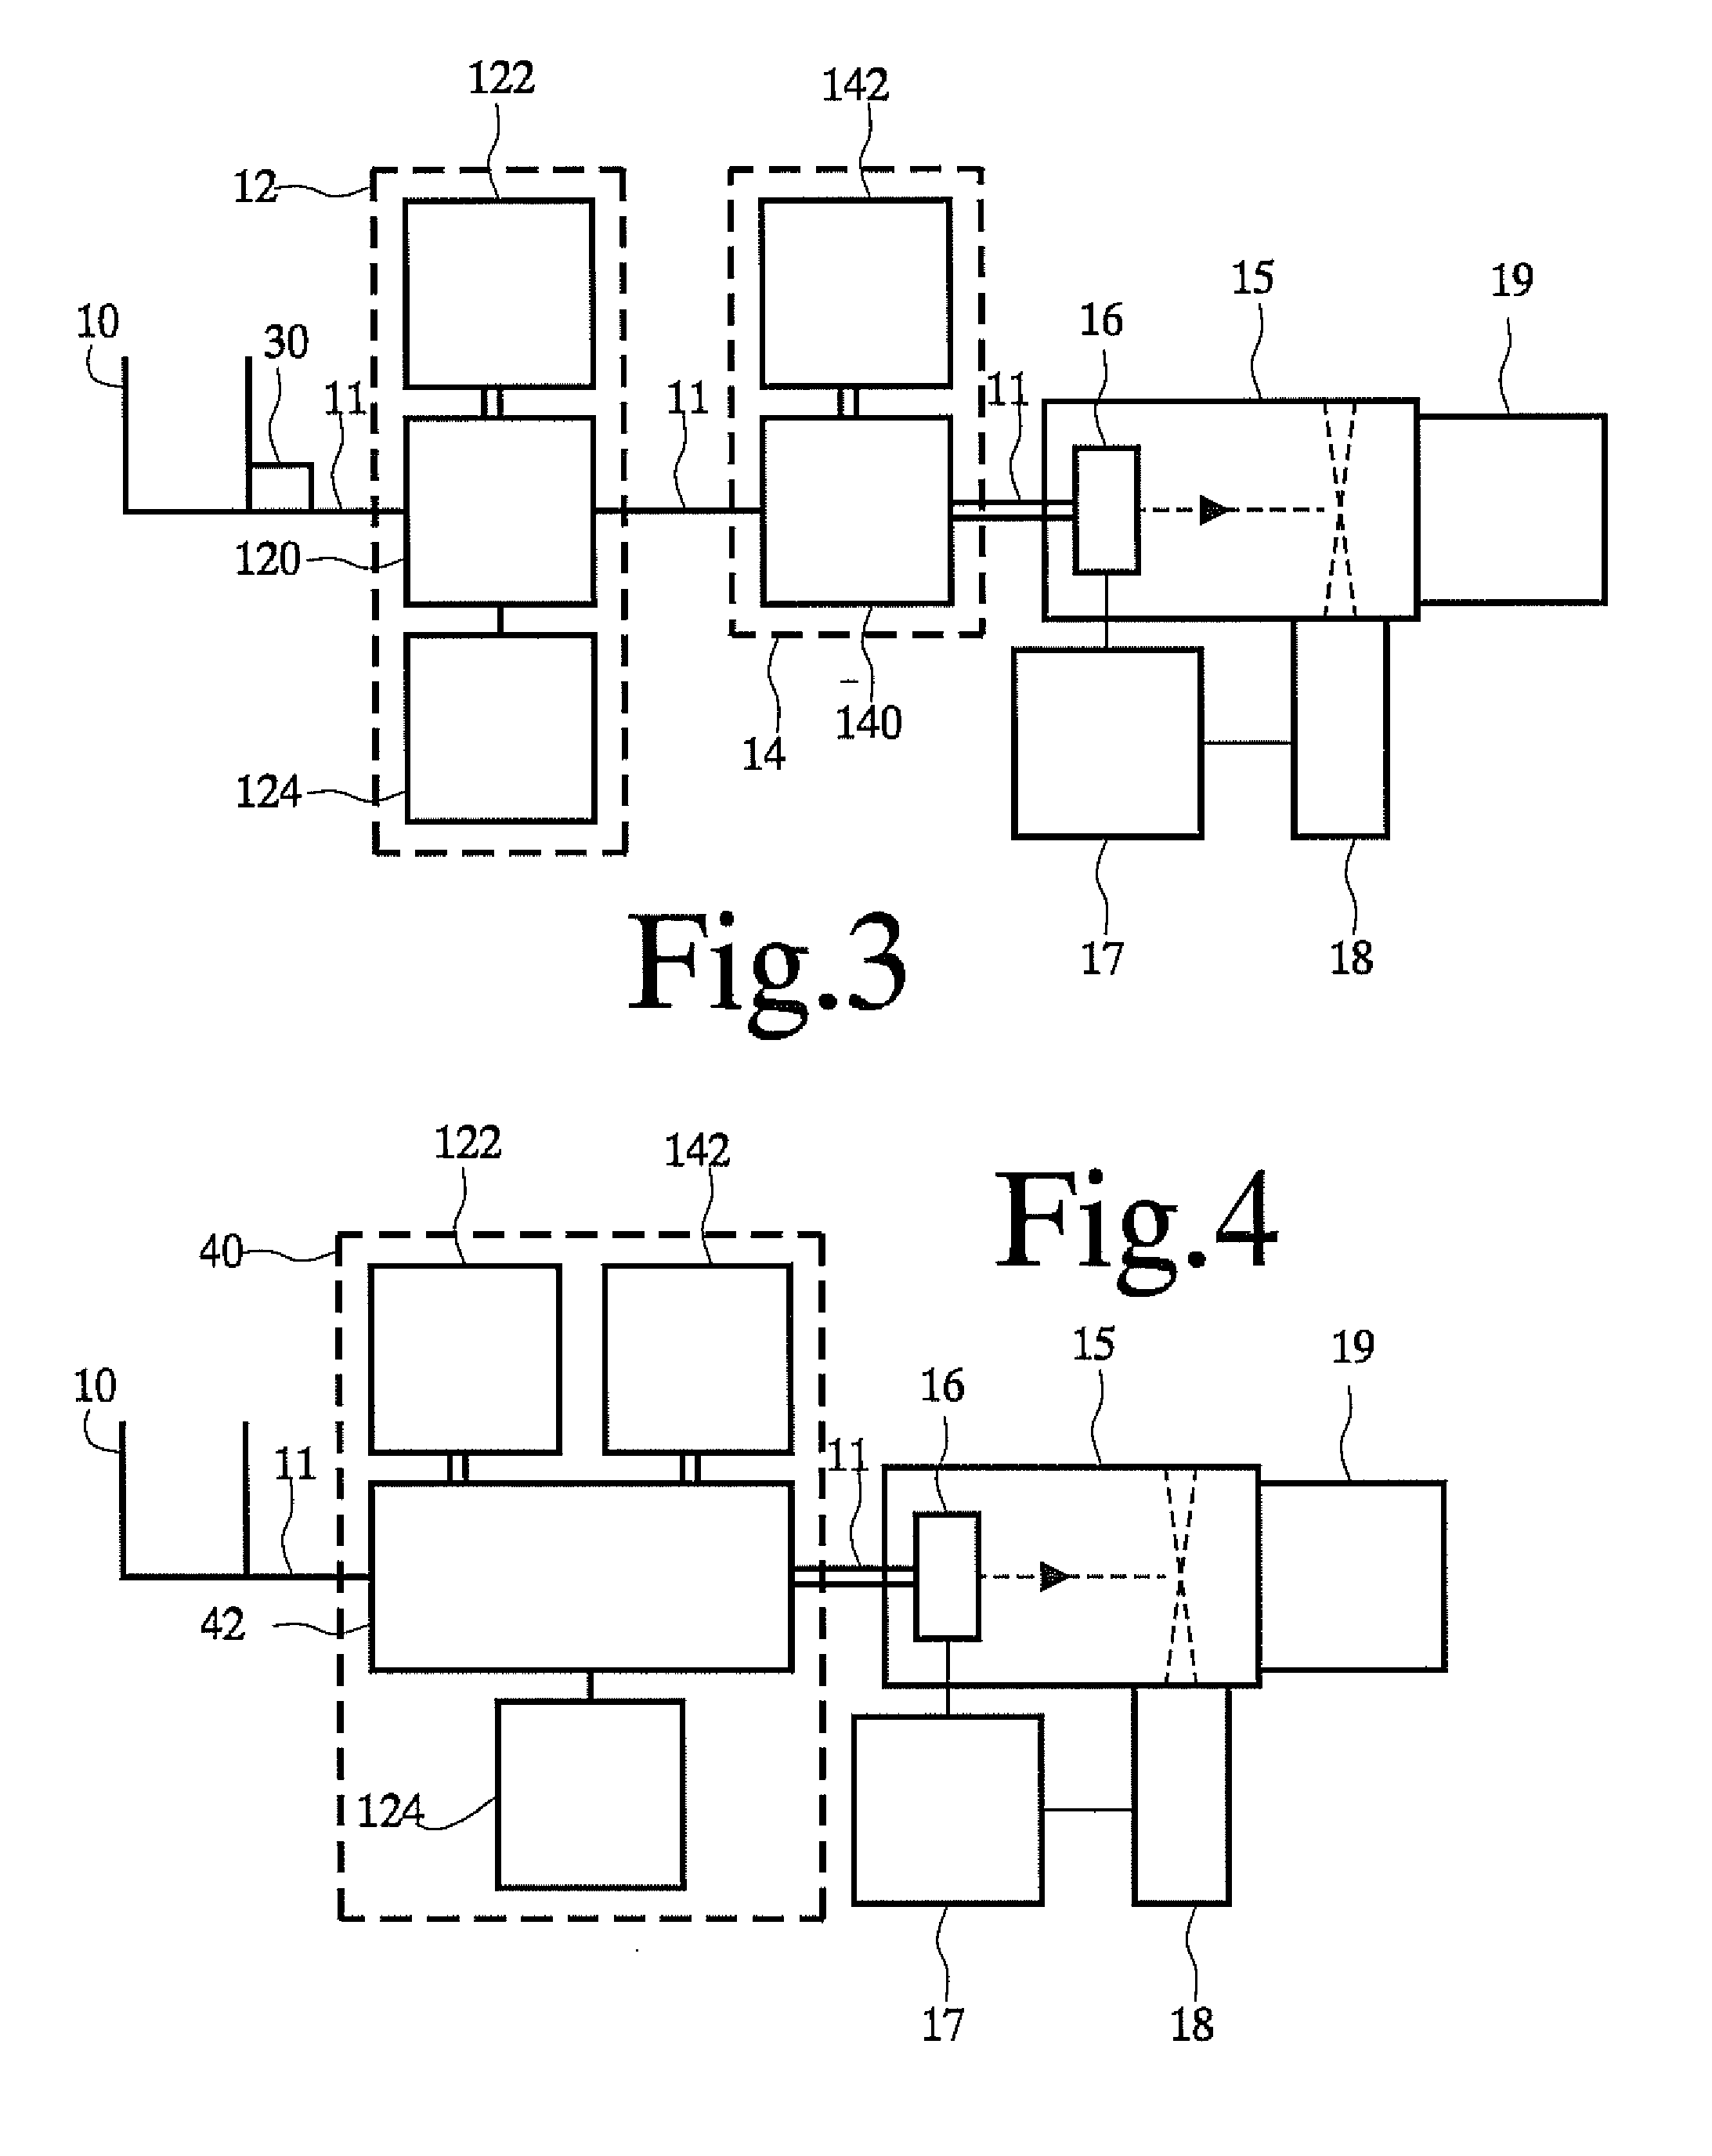 Method and Apparatus for Identification of Biological Material